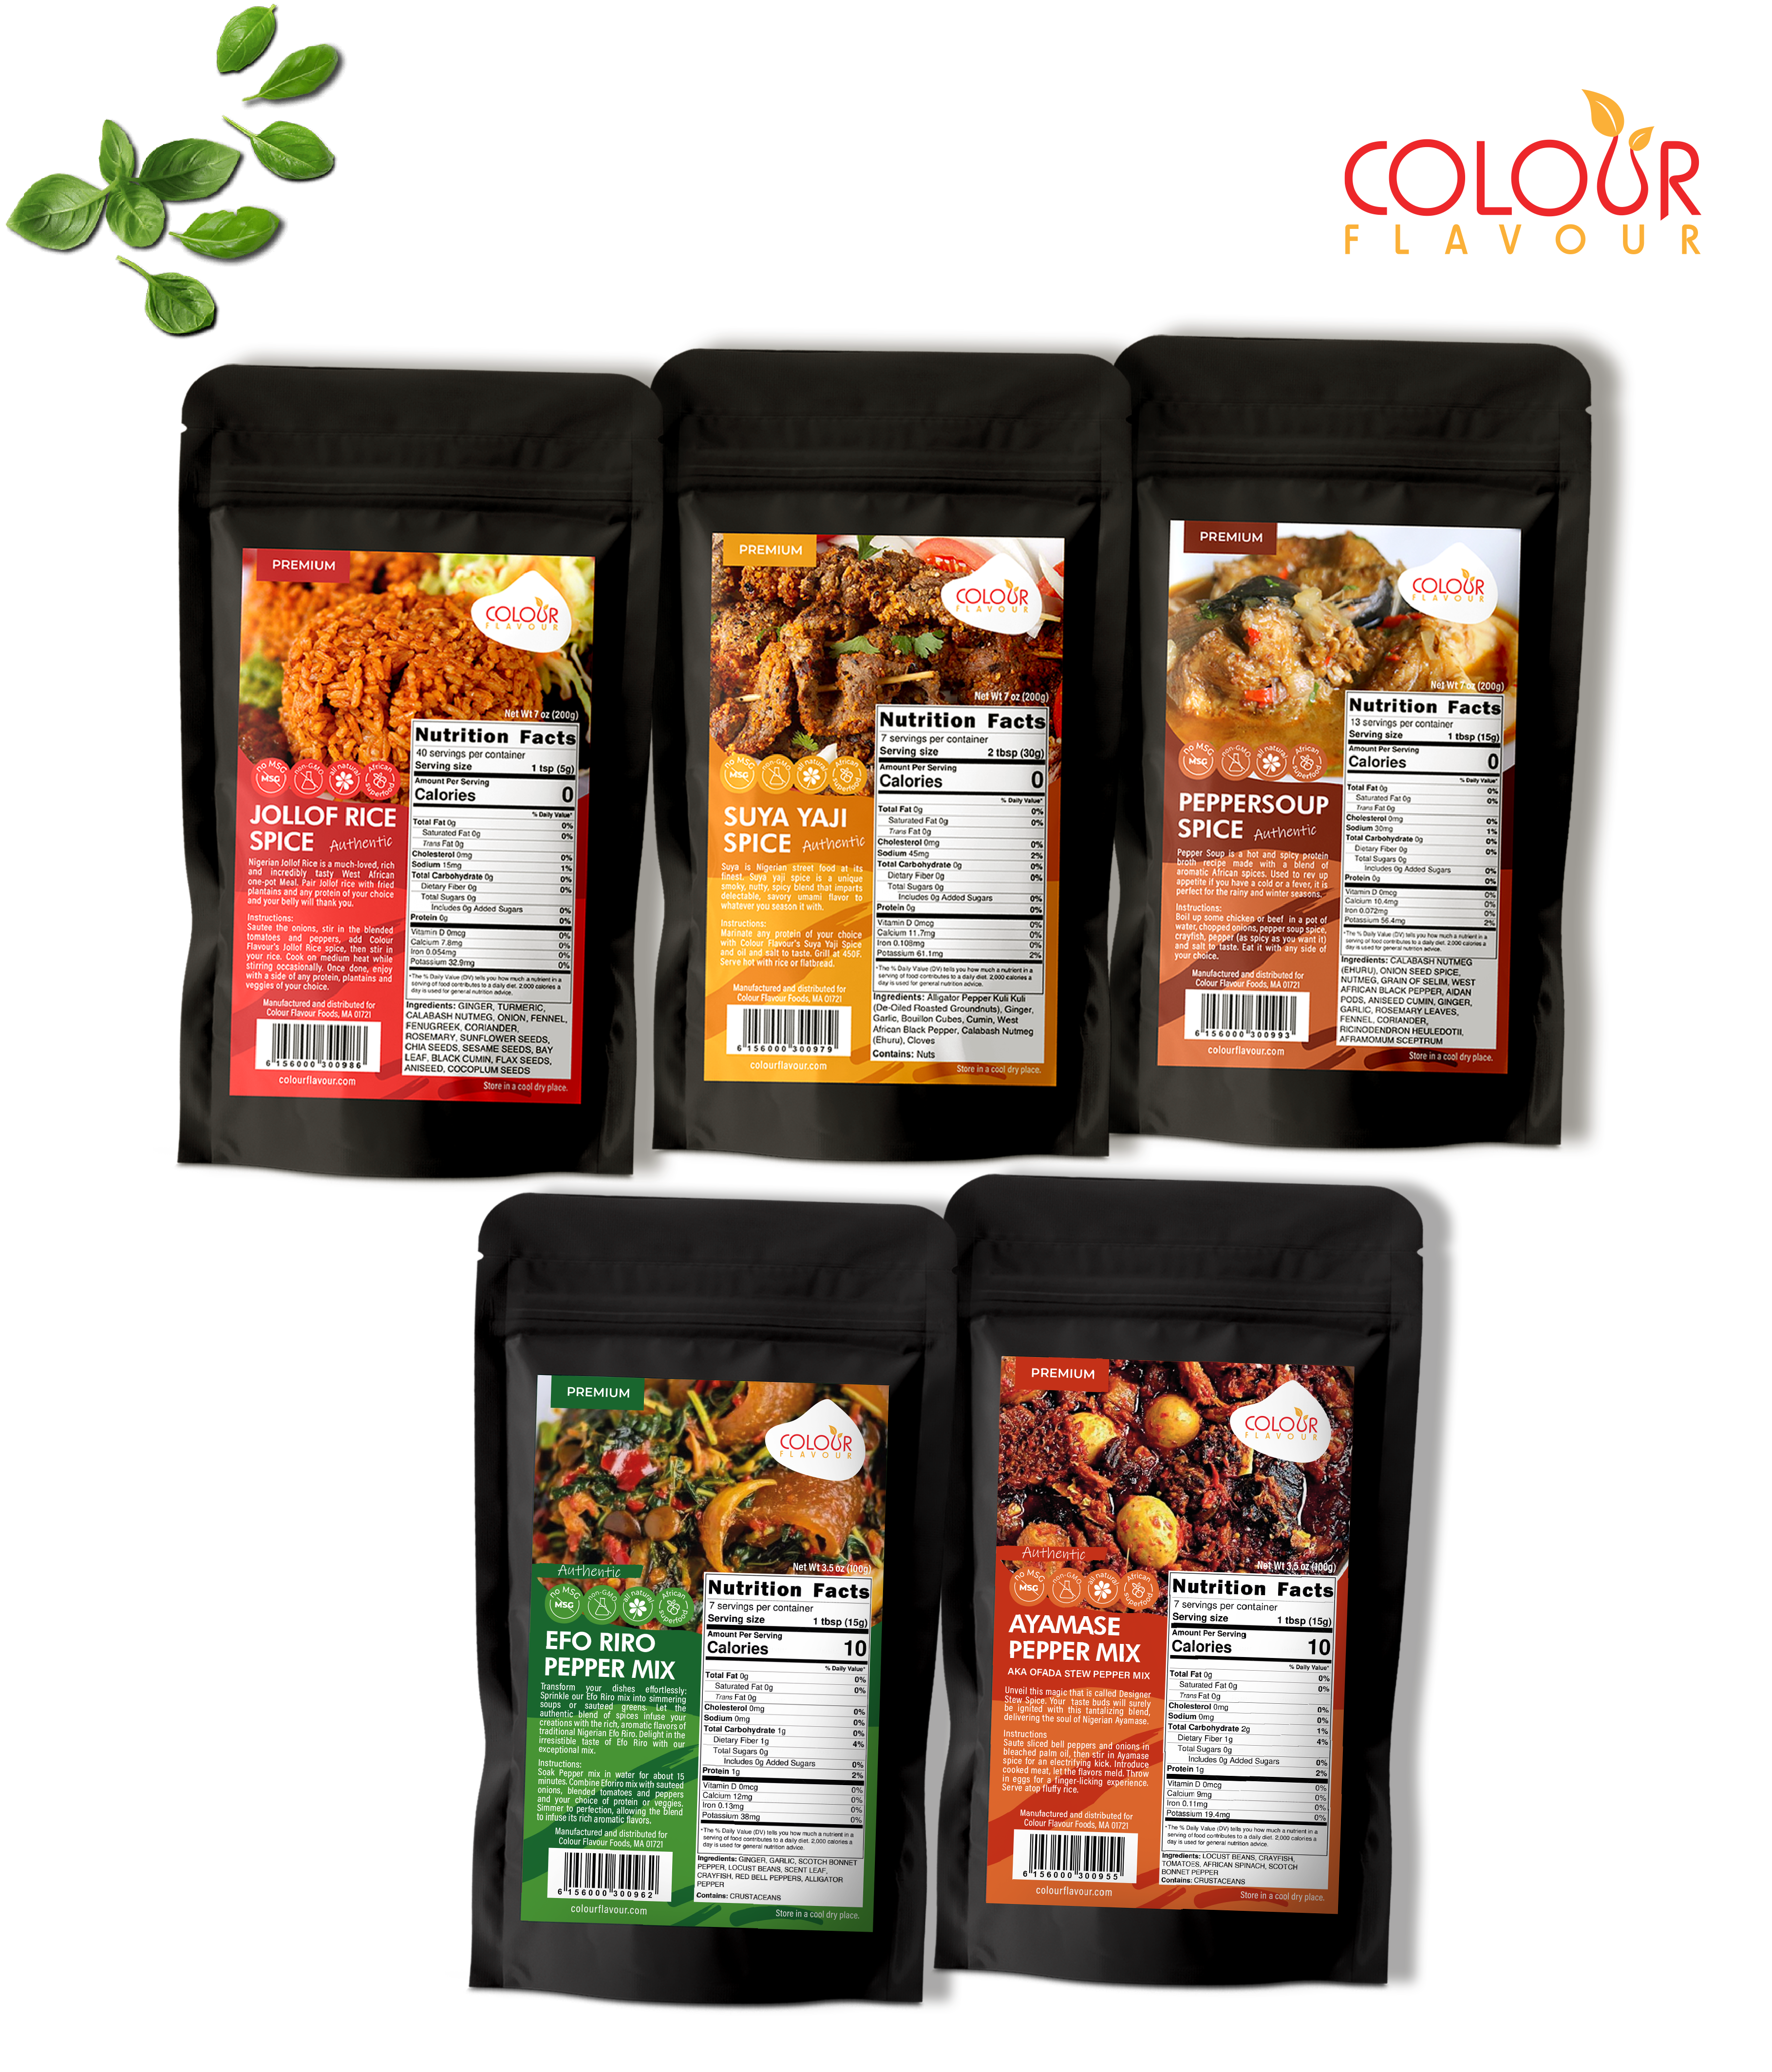 Five pouches with spices lay on white background. On the right top corner is the brand's logo.